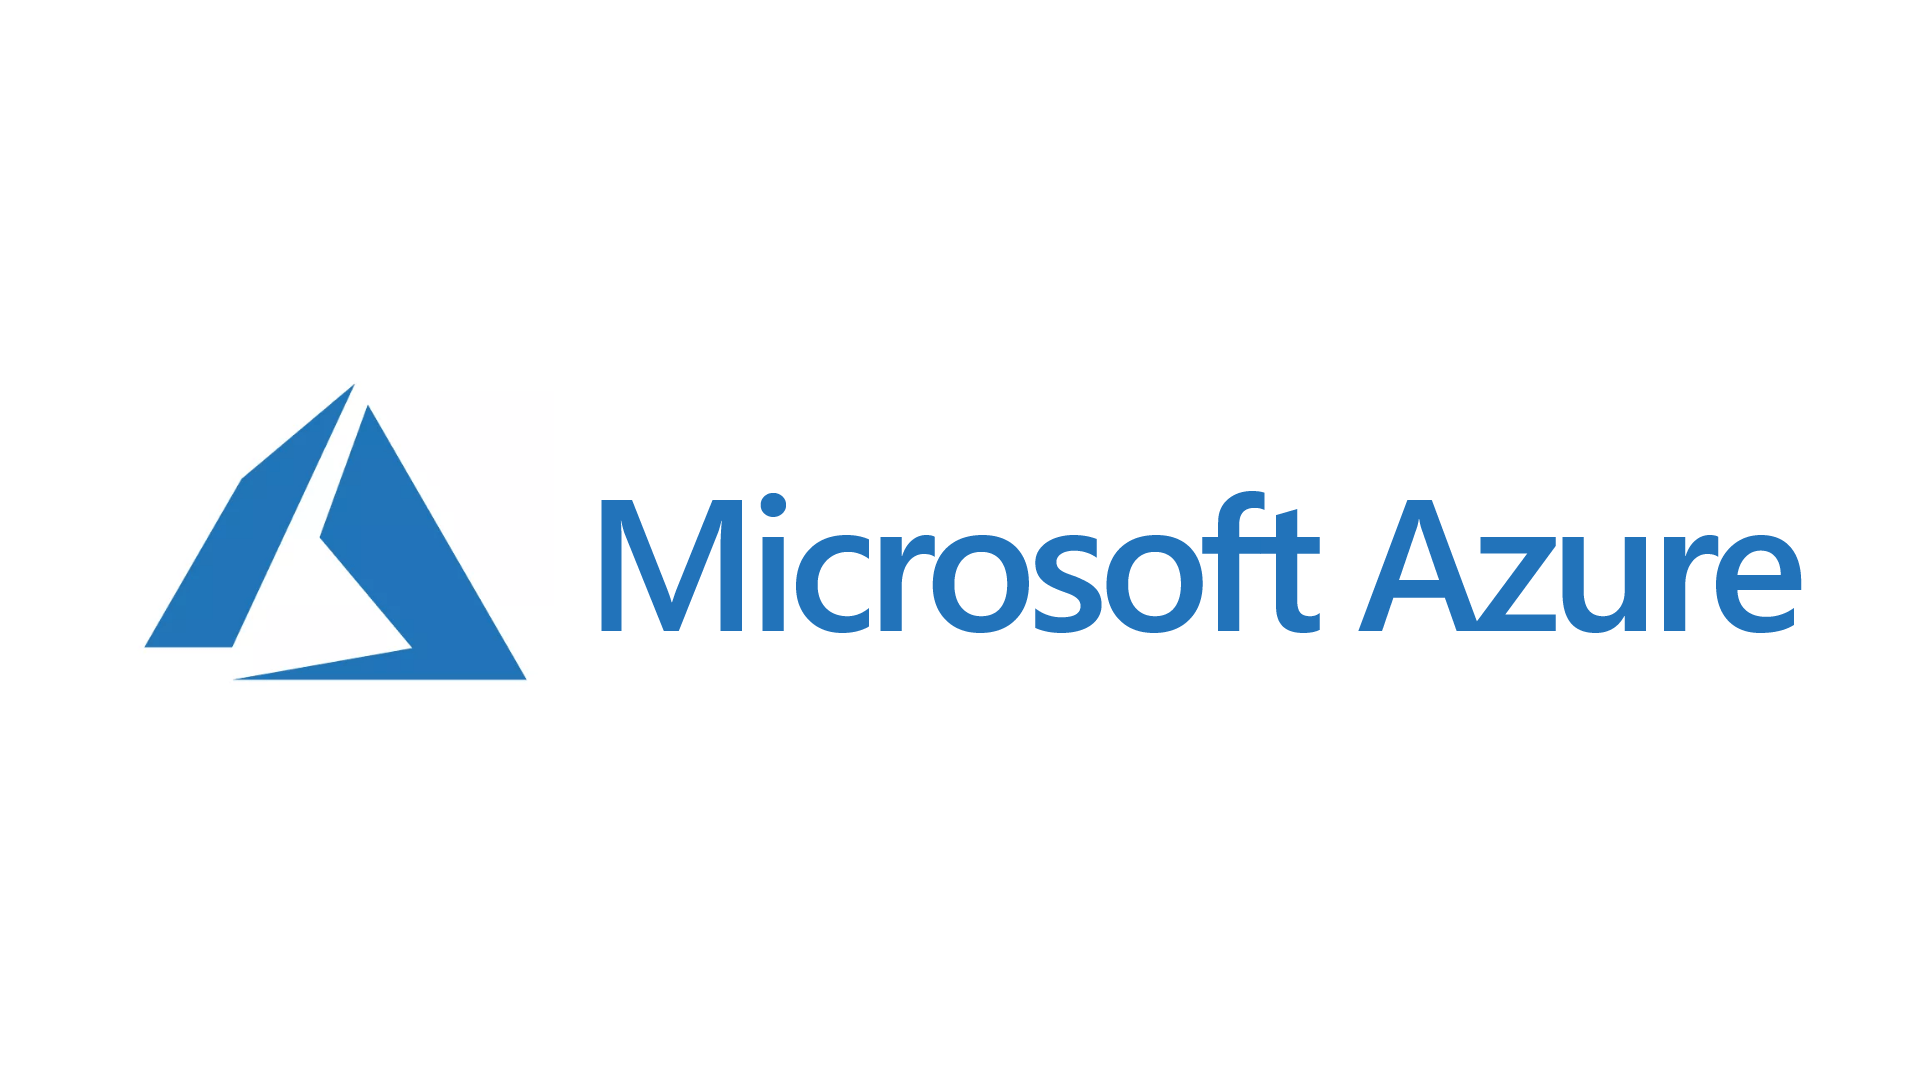  Developing solutions for Microsoft Azure